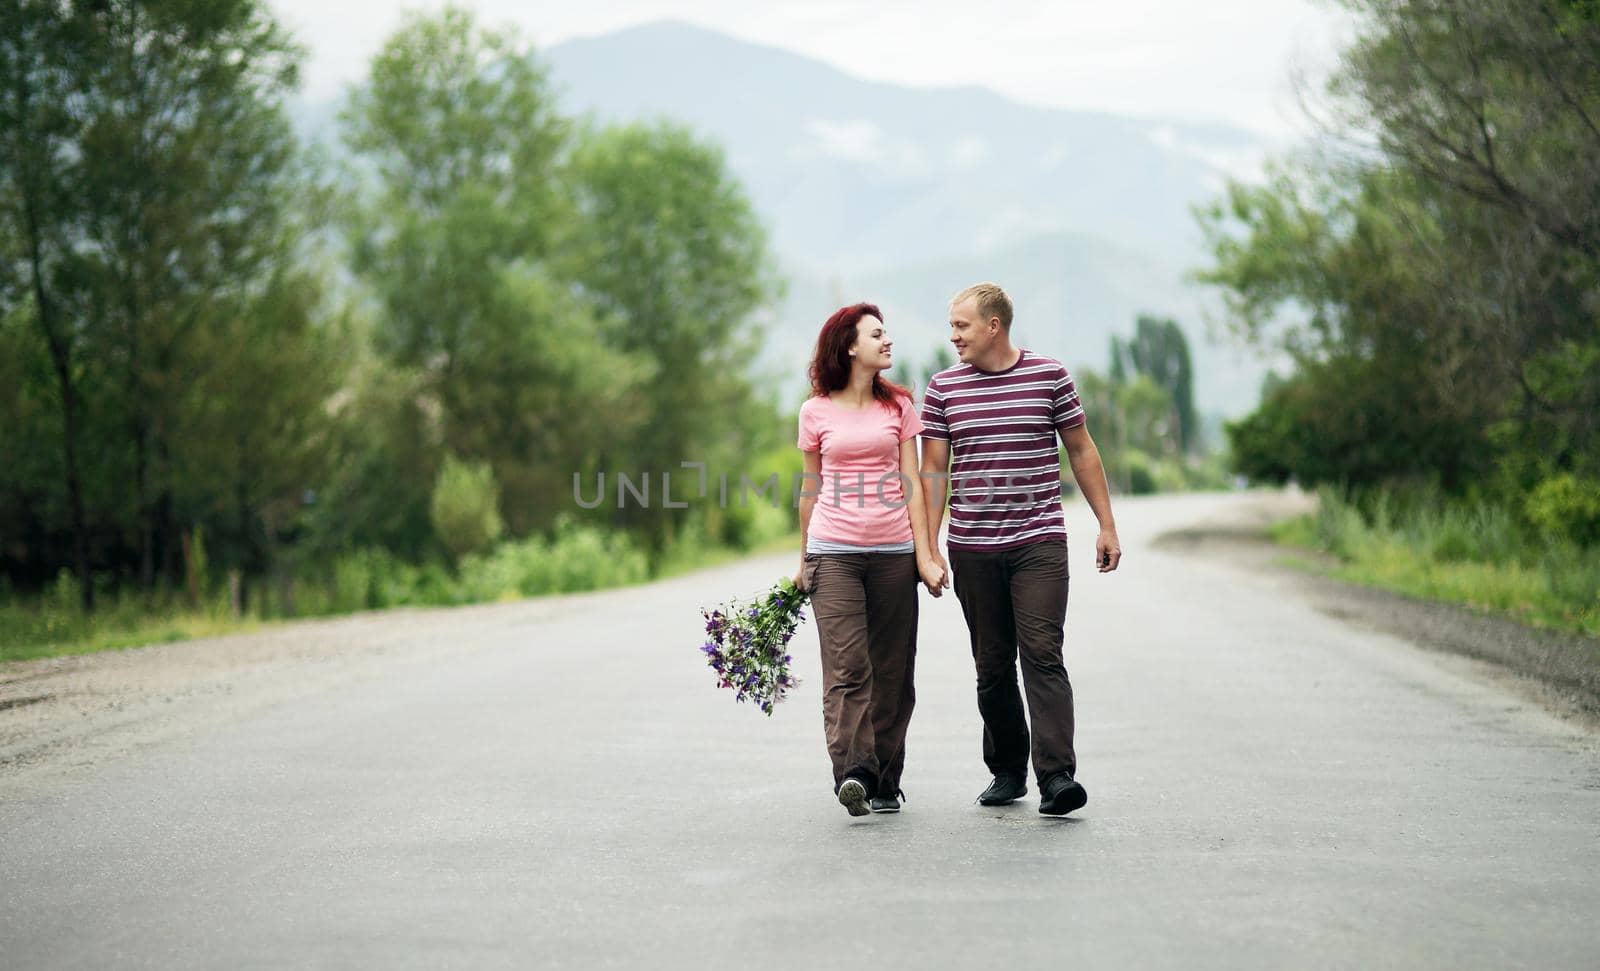 Young happy couple man and woman are walking along an empty road, the girl is holding a bouquet of flowers. 